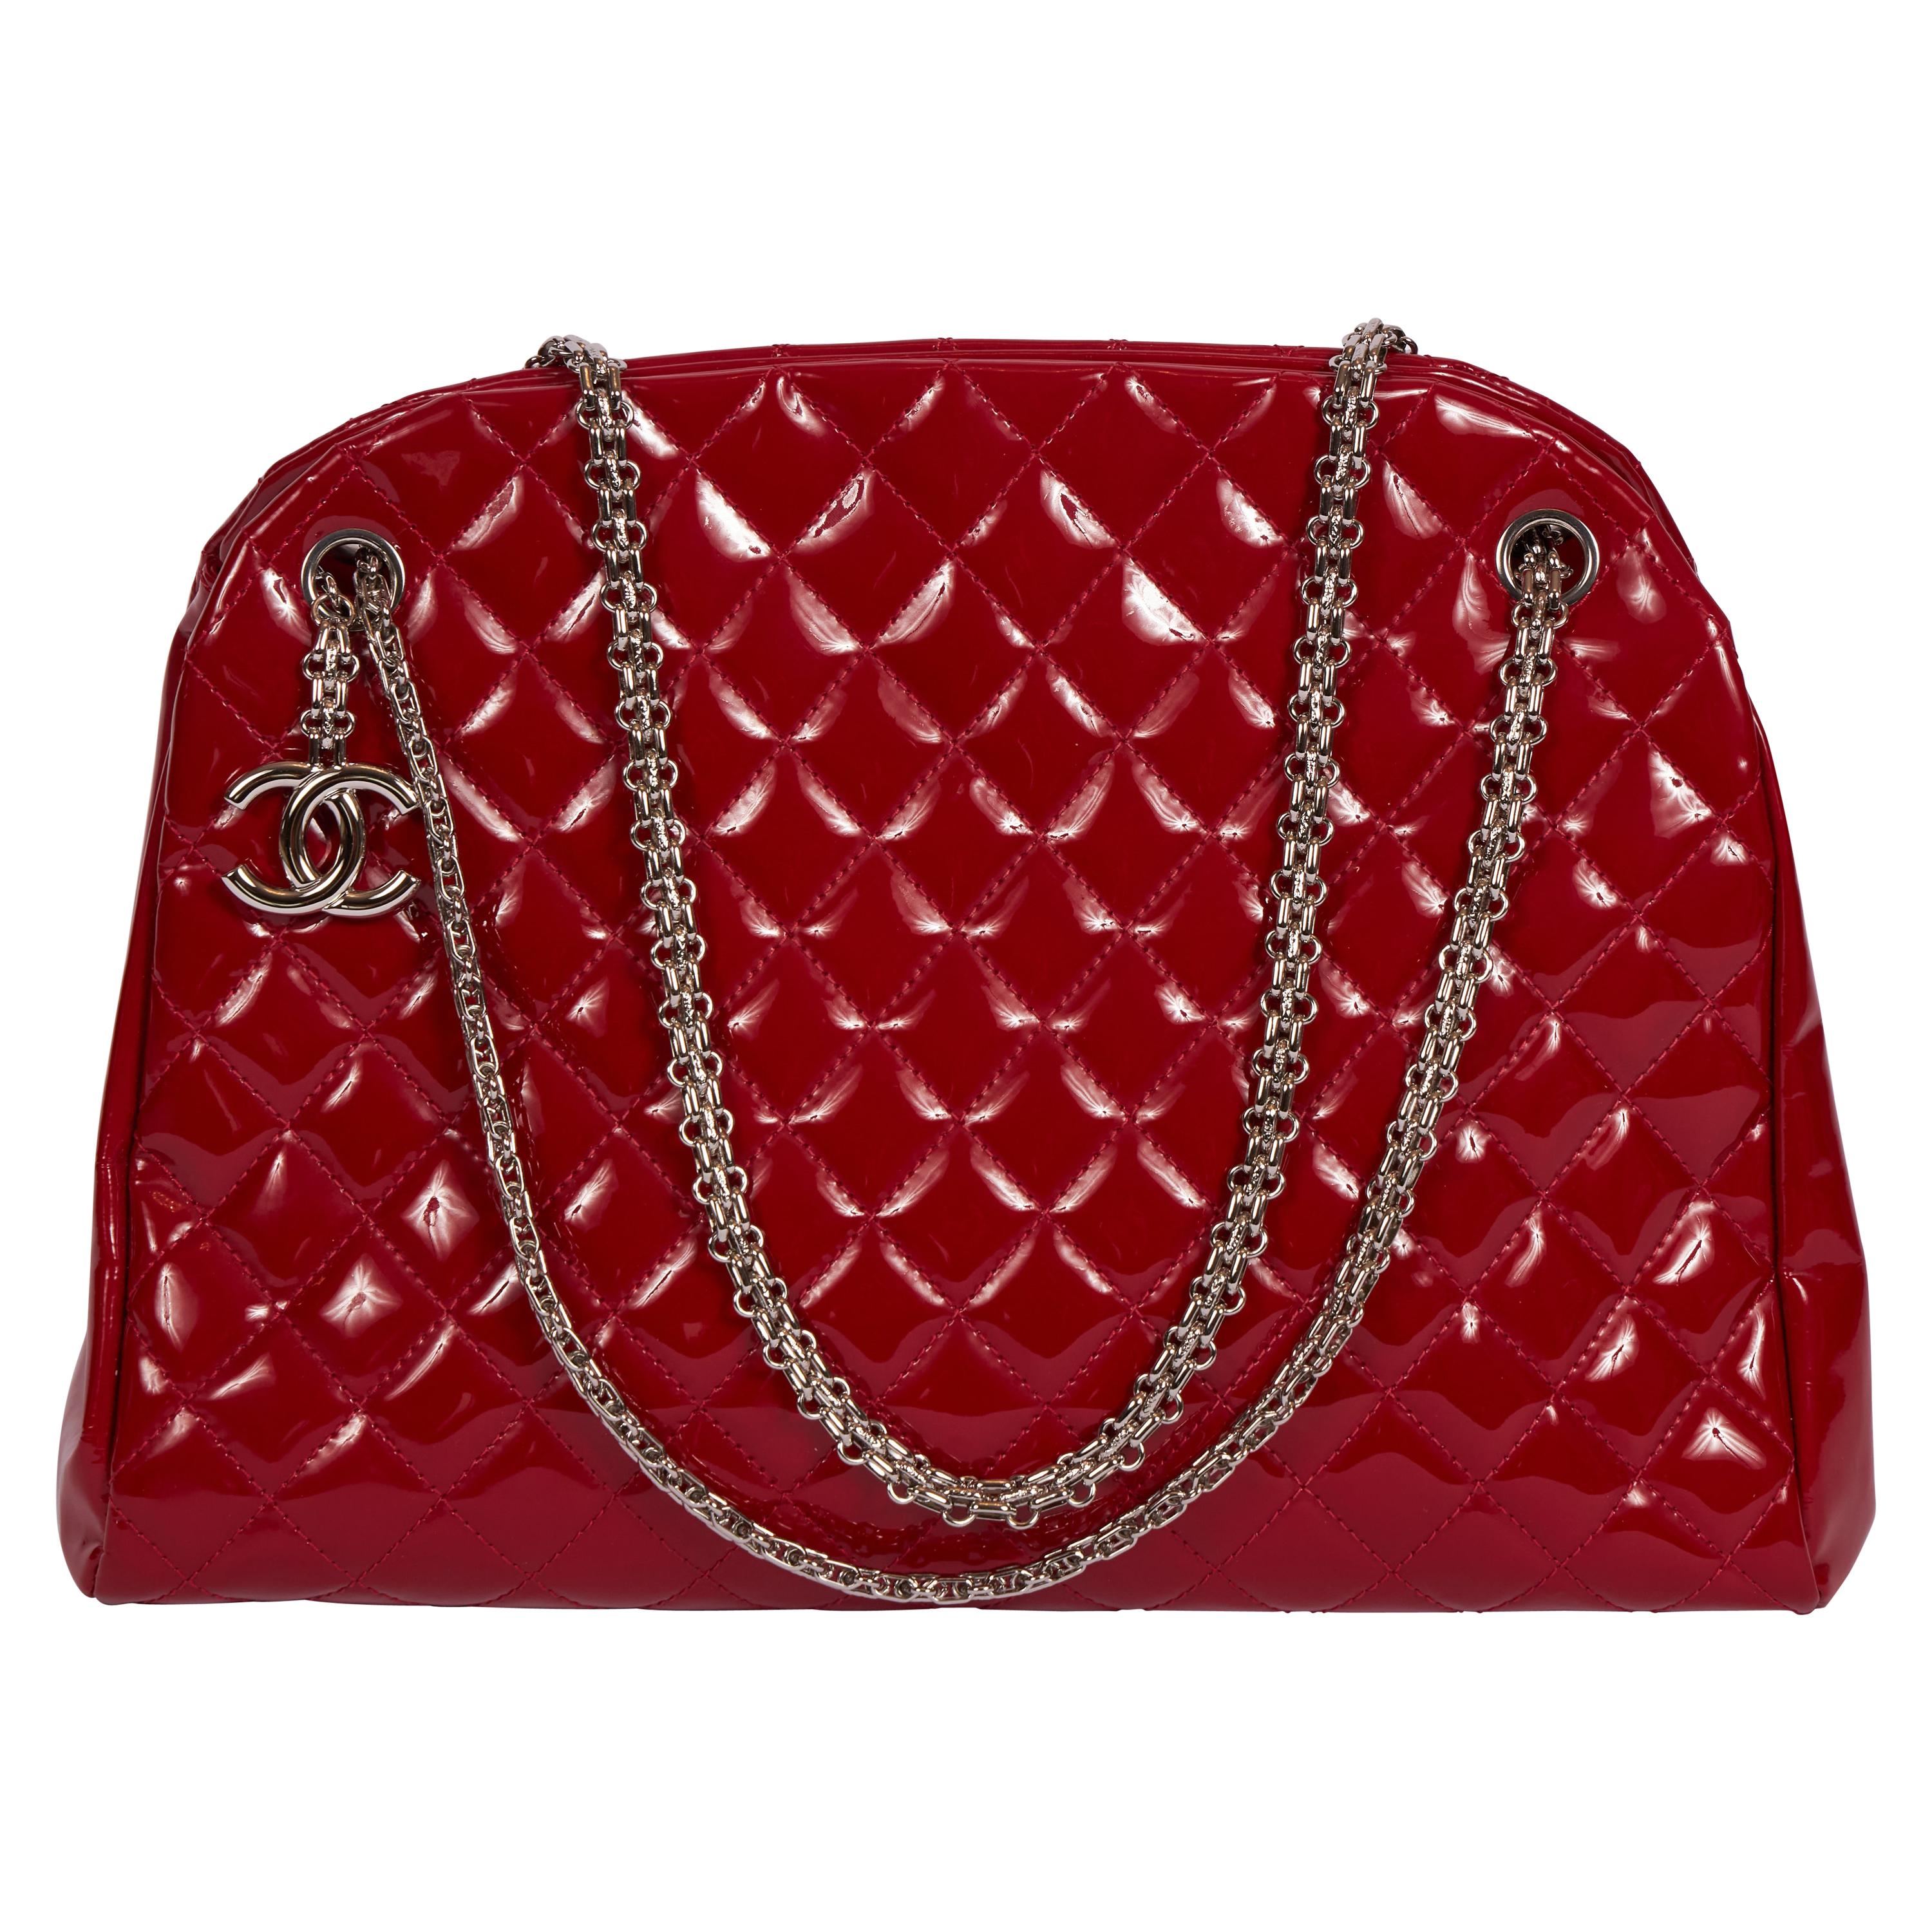 Chanel Red Patent Large Mademoiselle Bag